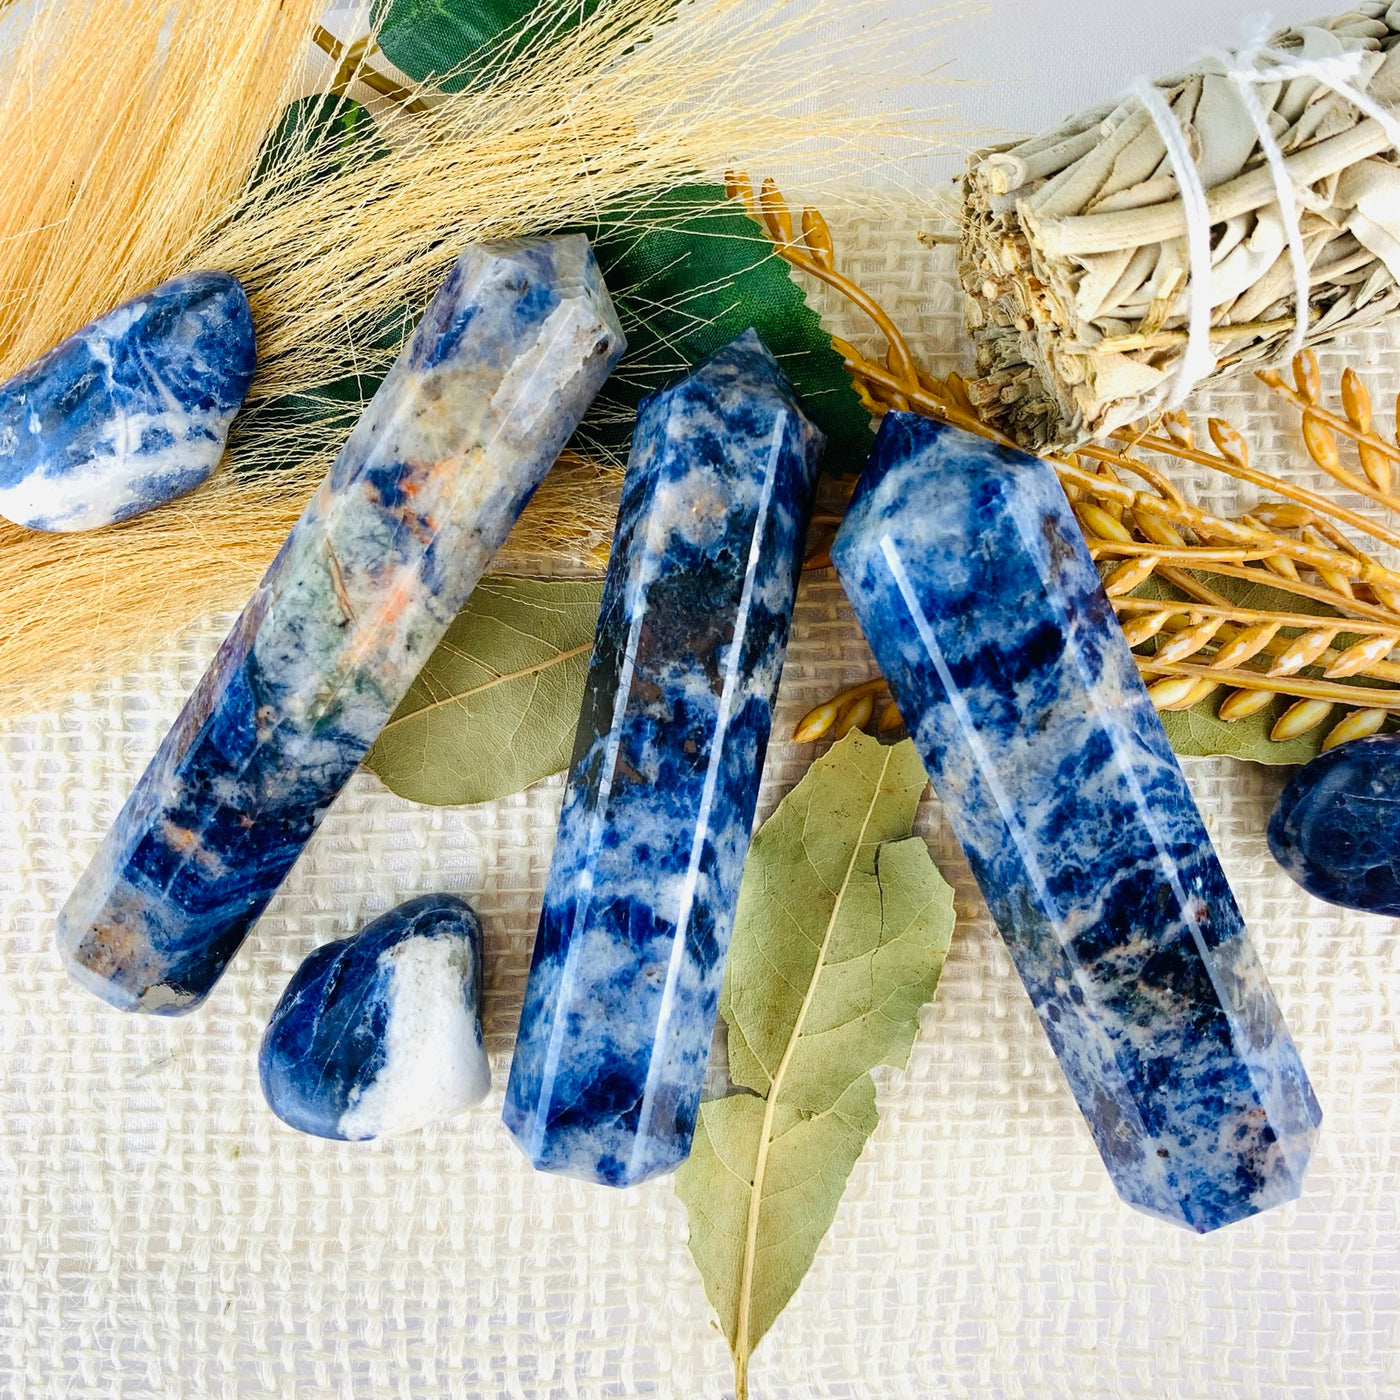 sodalite Healing Crystal Towers Obelisks For Money, Protection, Love, Strength